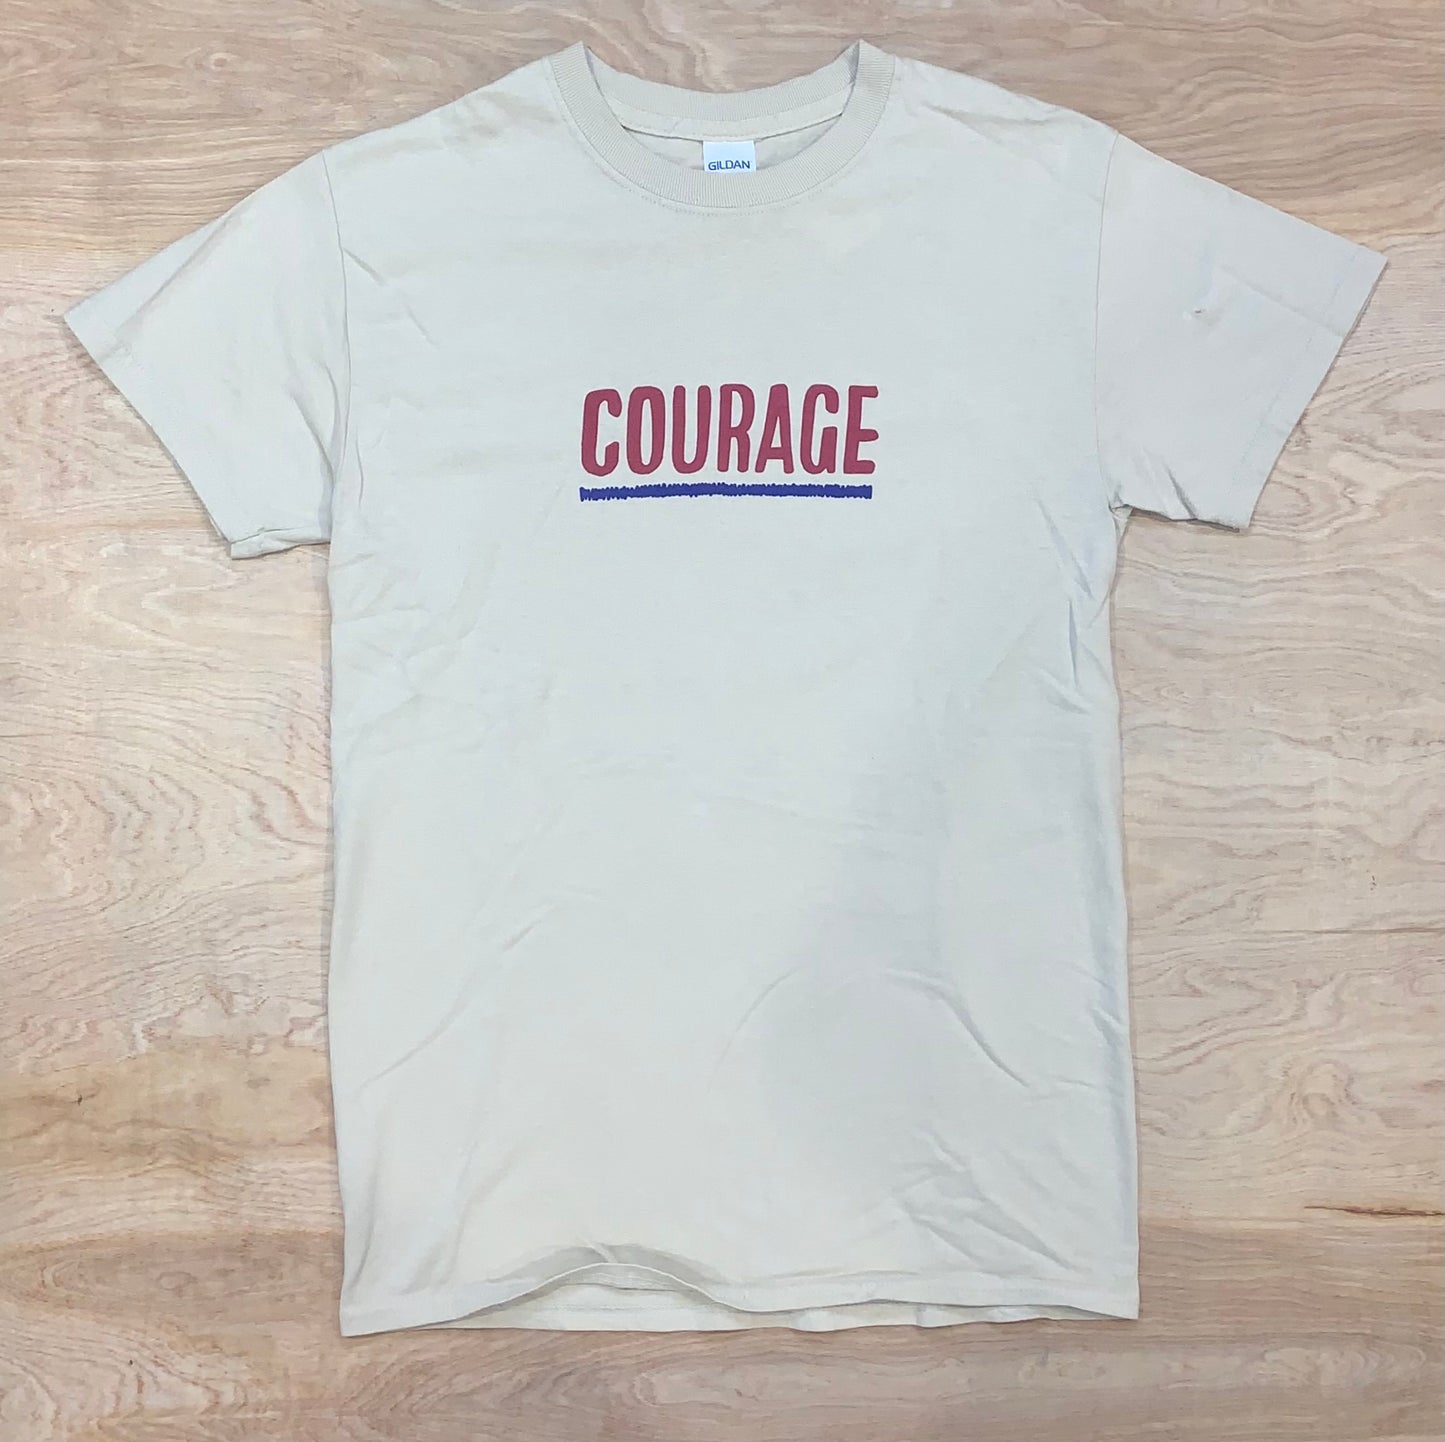 CHANCE THE RAPPER “courage” Concert T-shirt